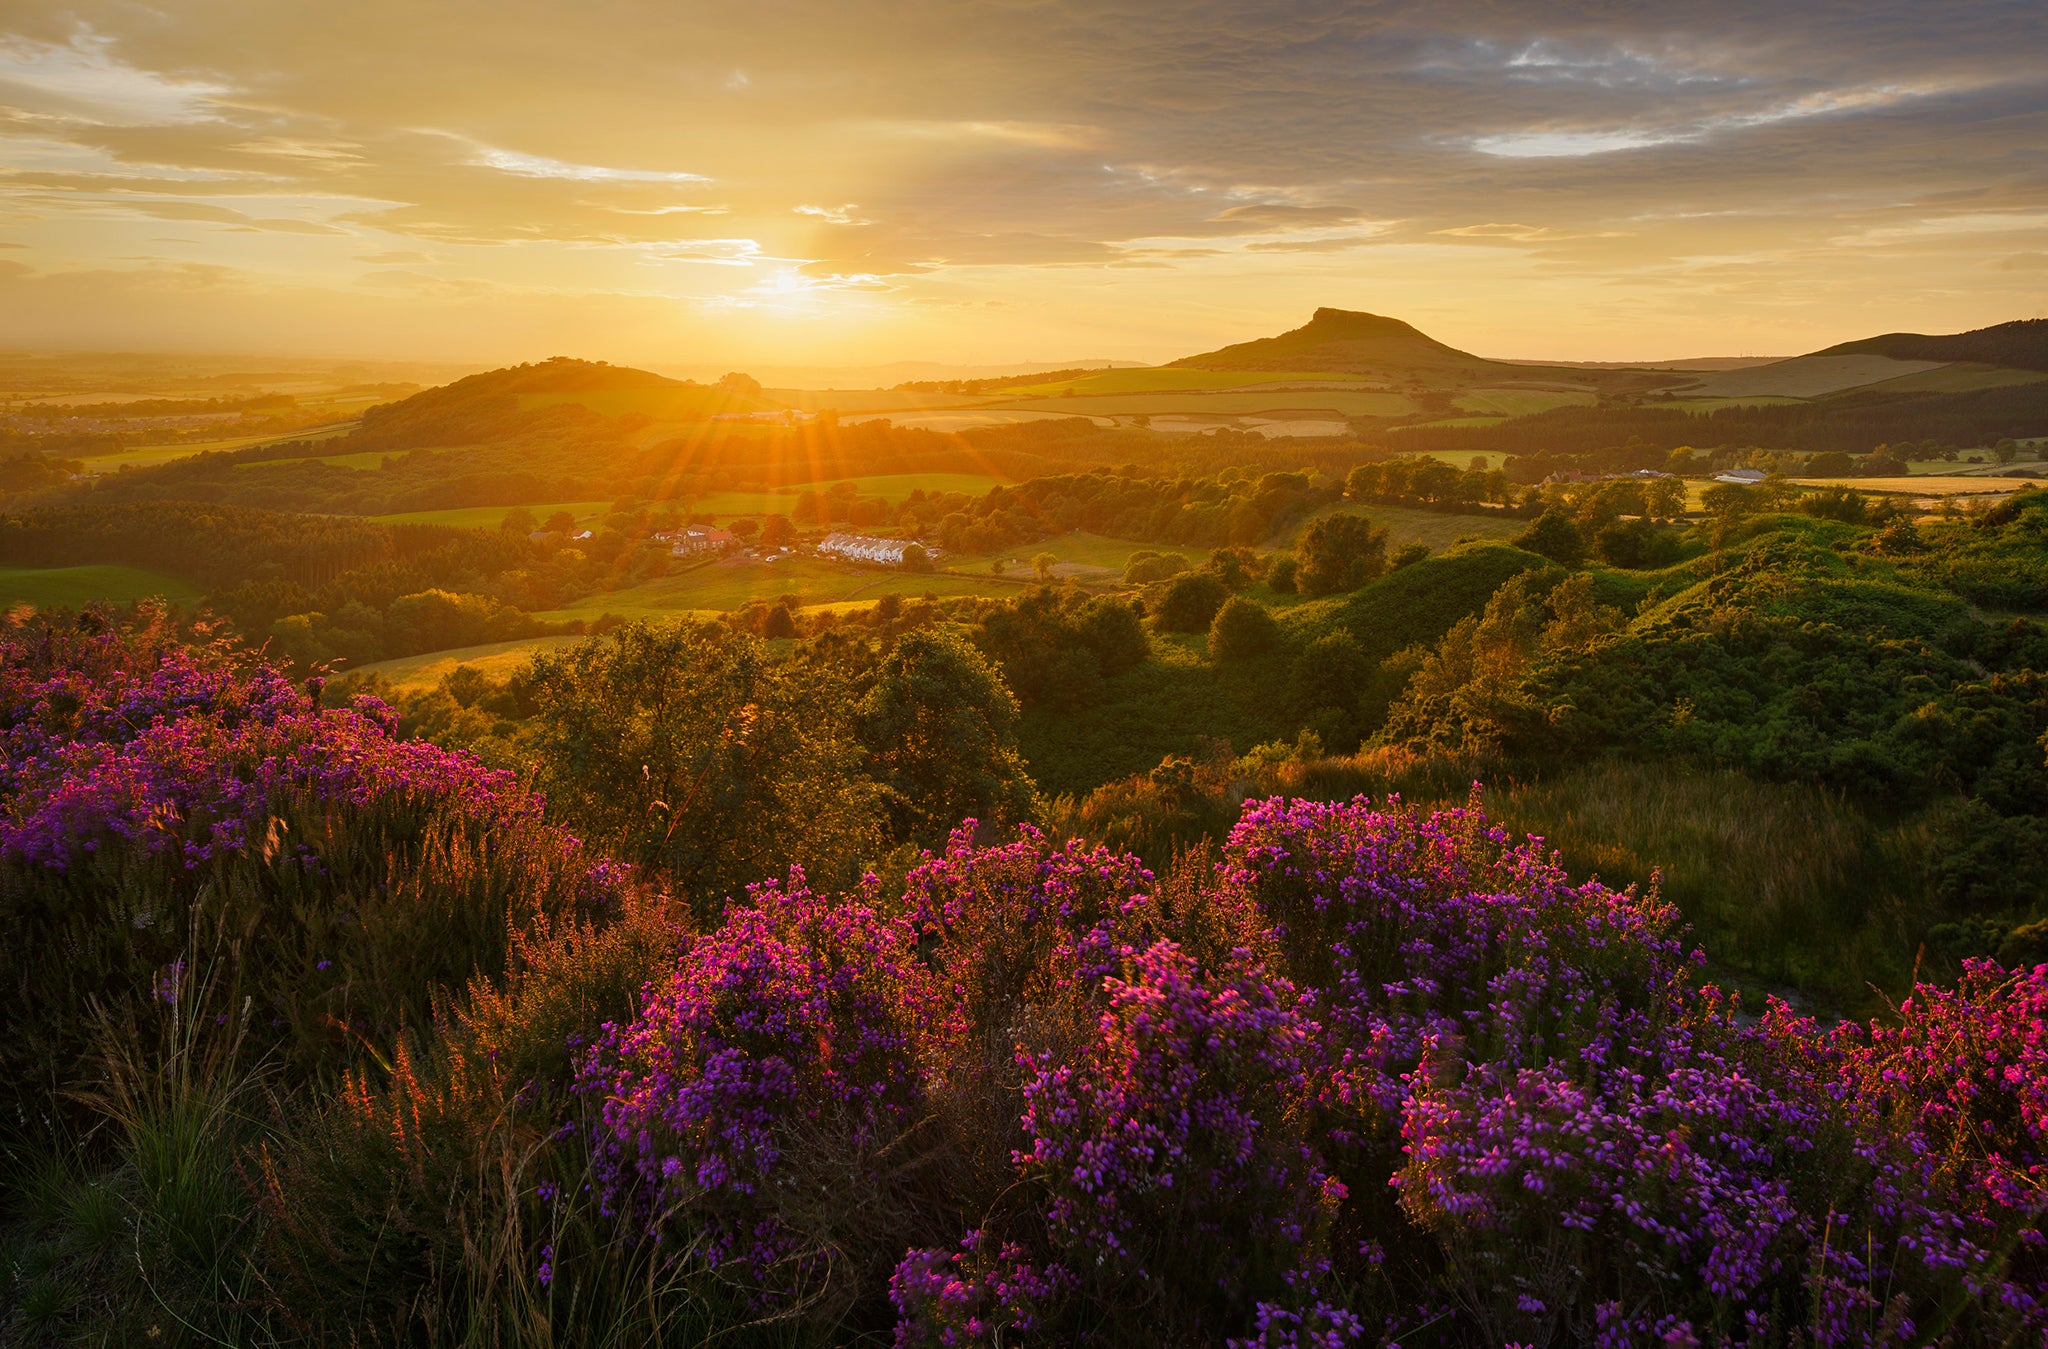 Heather in Bloom, Roseberry Topping, North Yorkshire - winner of the Countryside is Great category